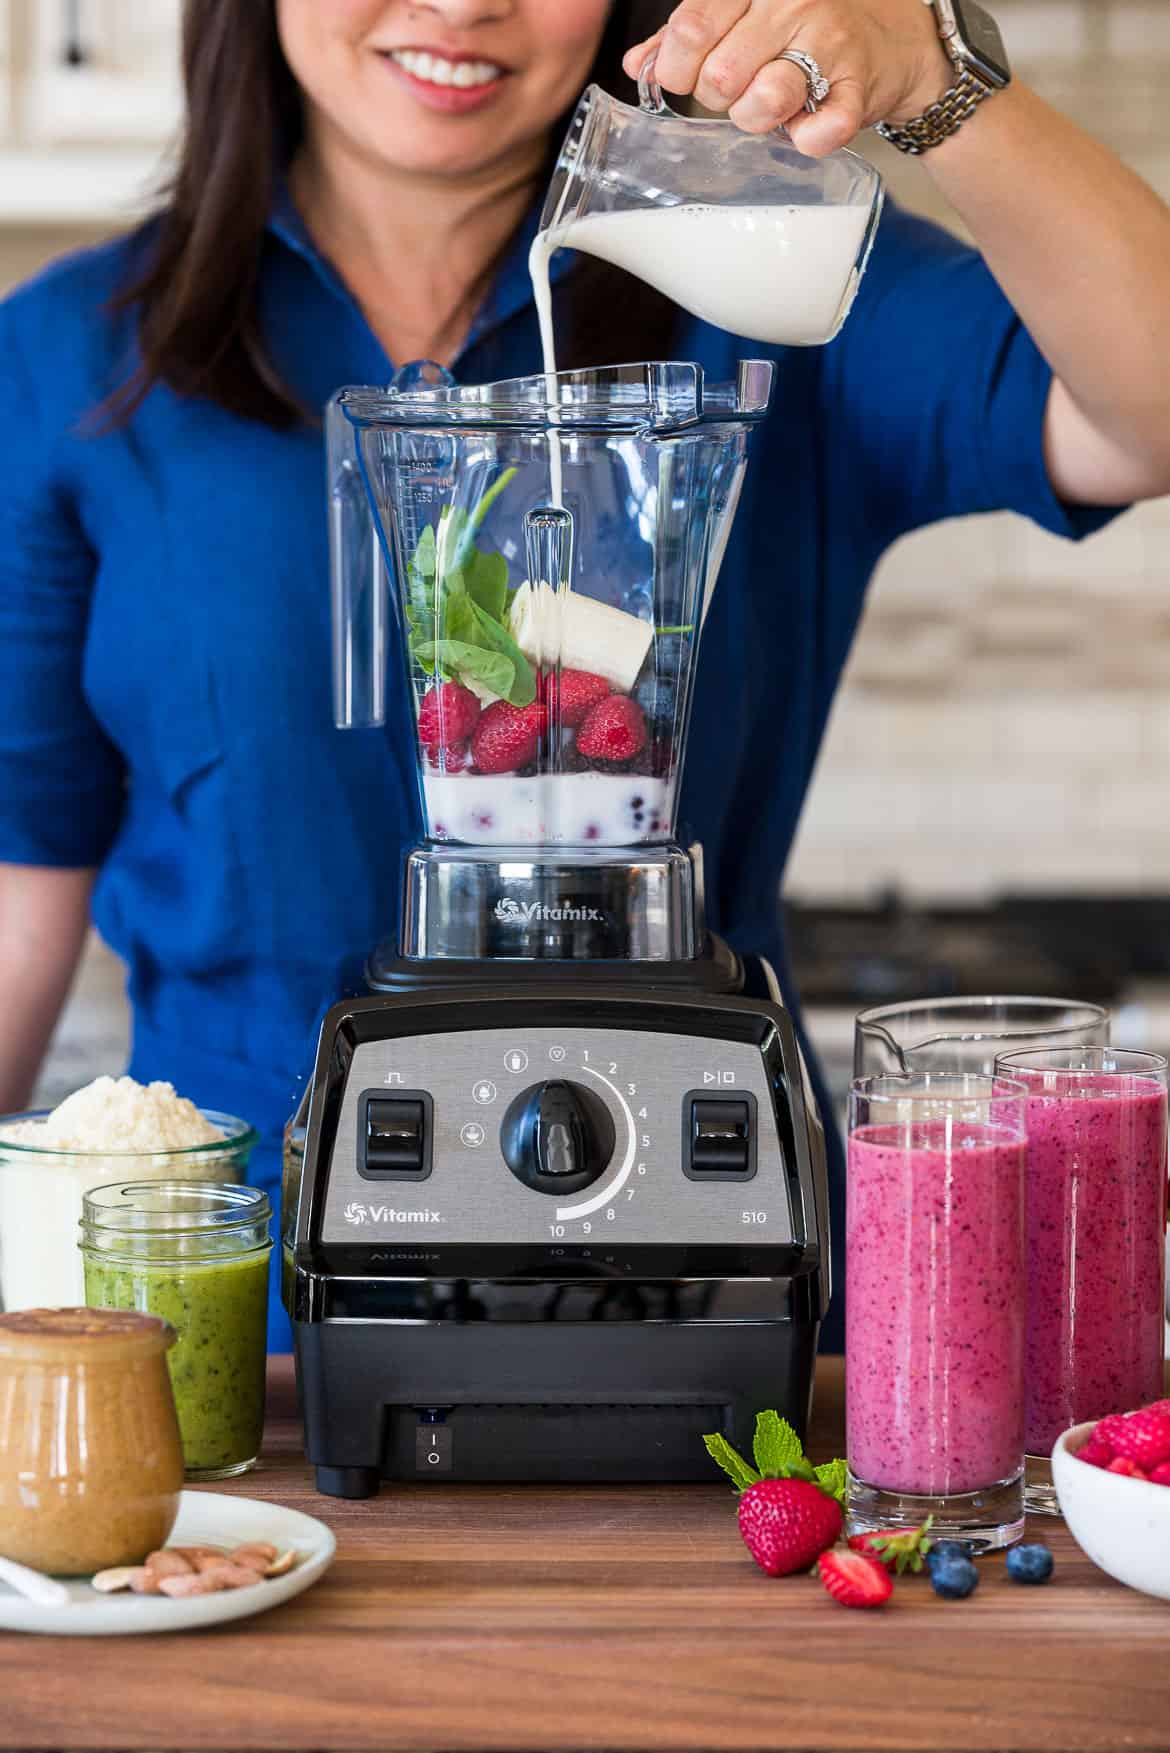 The Best Blenders For Making Smoothies, Soups, and So Much More